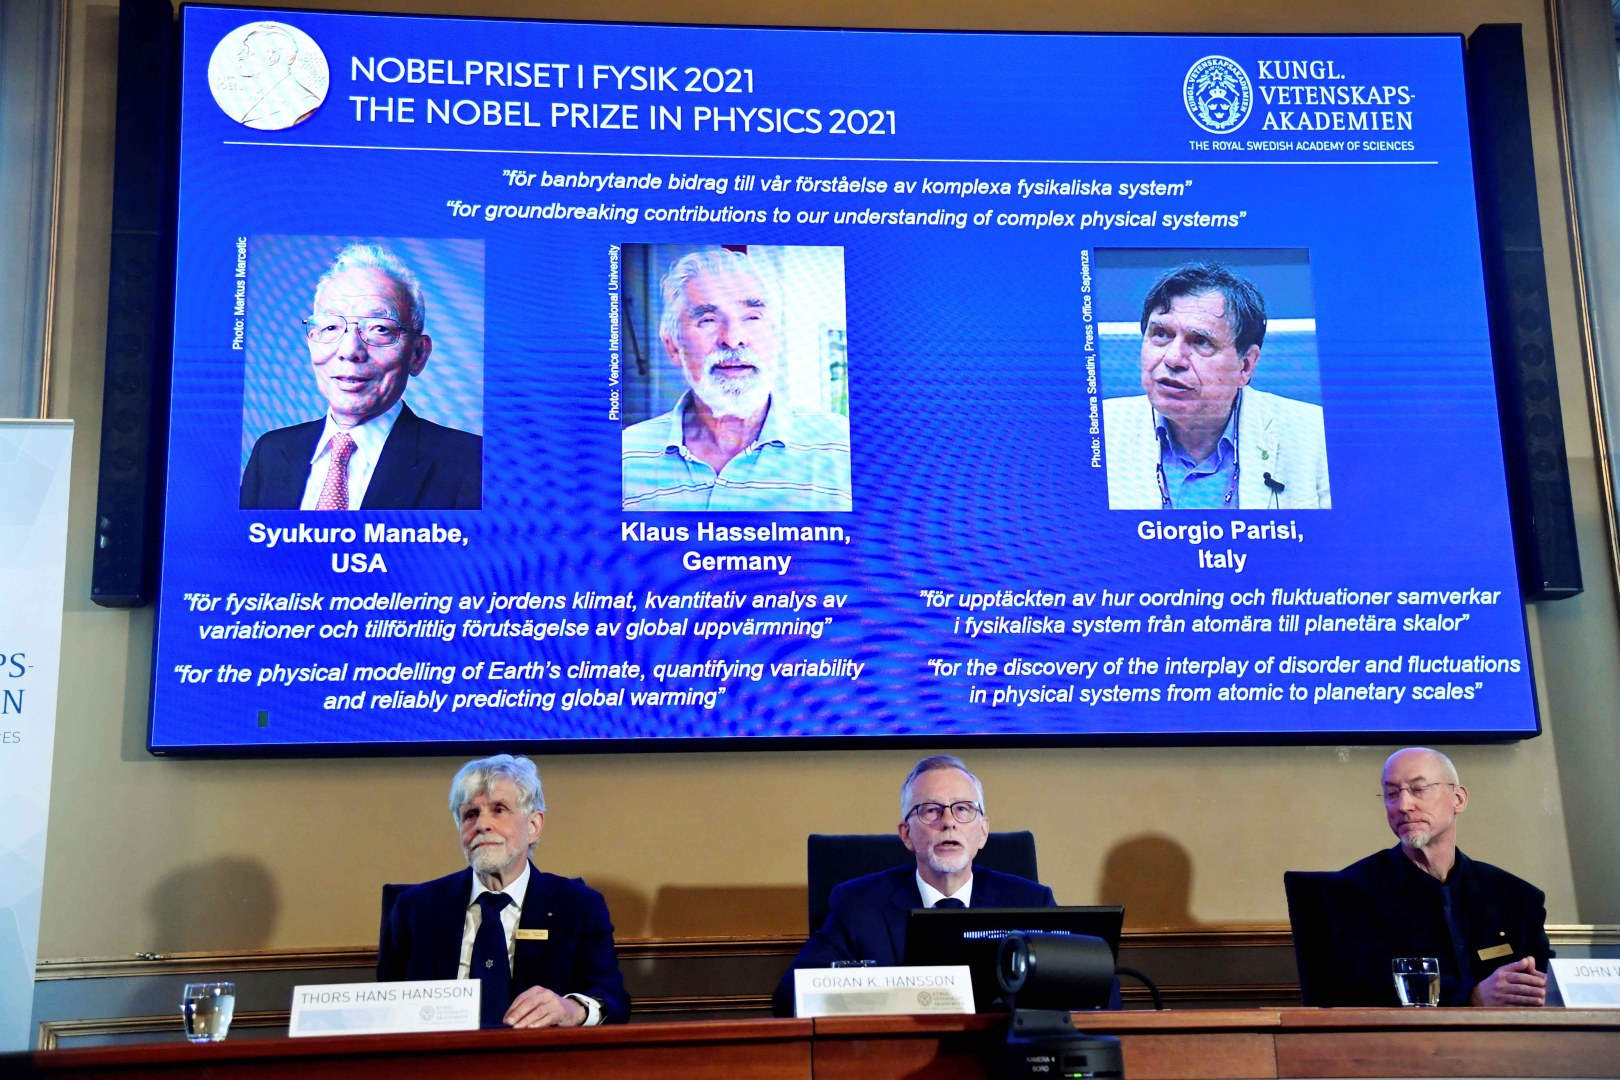 Three people won the Nobel Prize in Physics for their work on climate change.